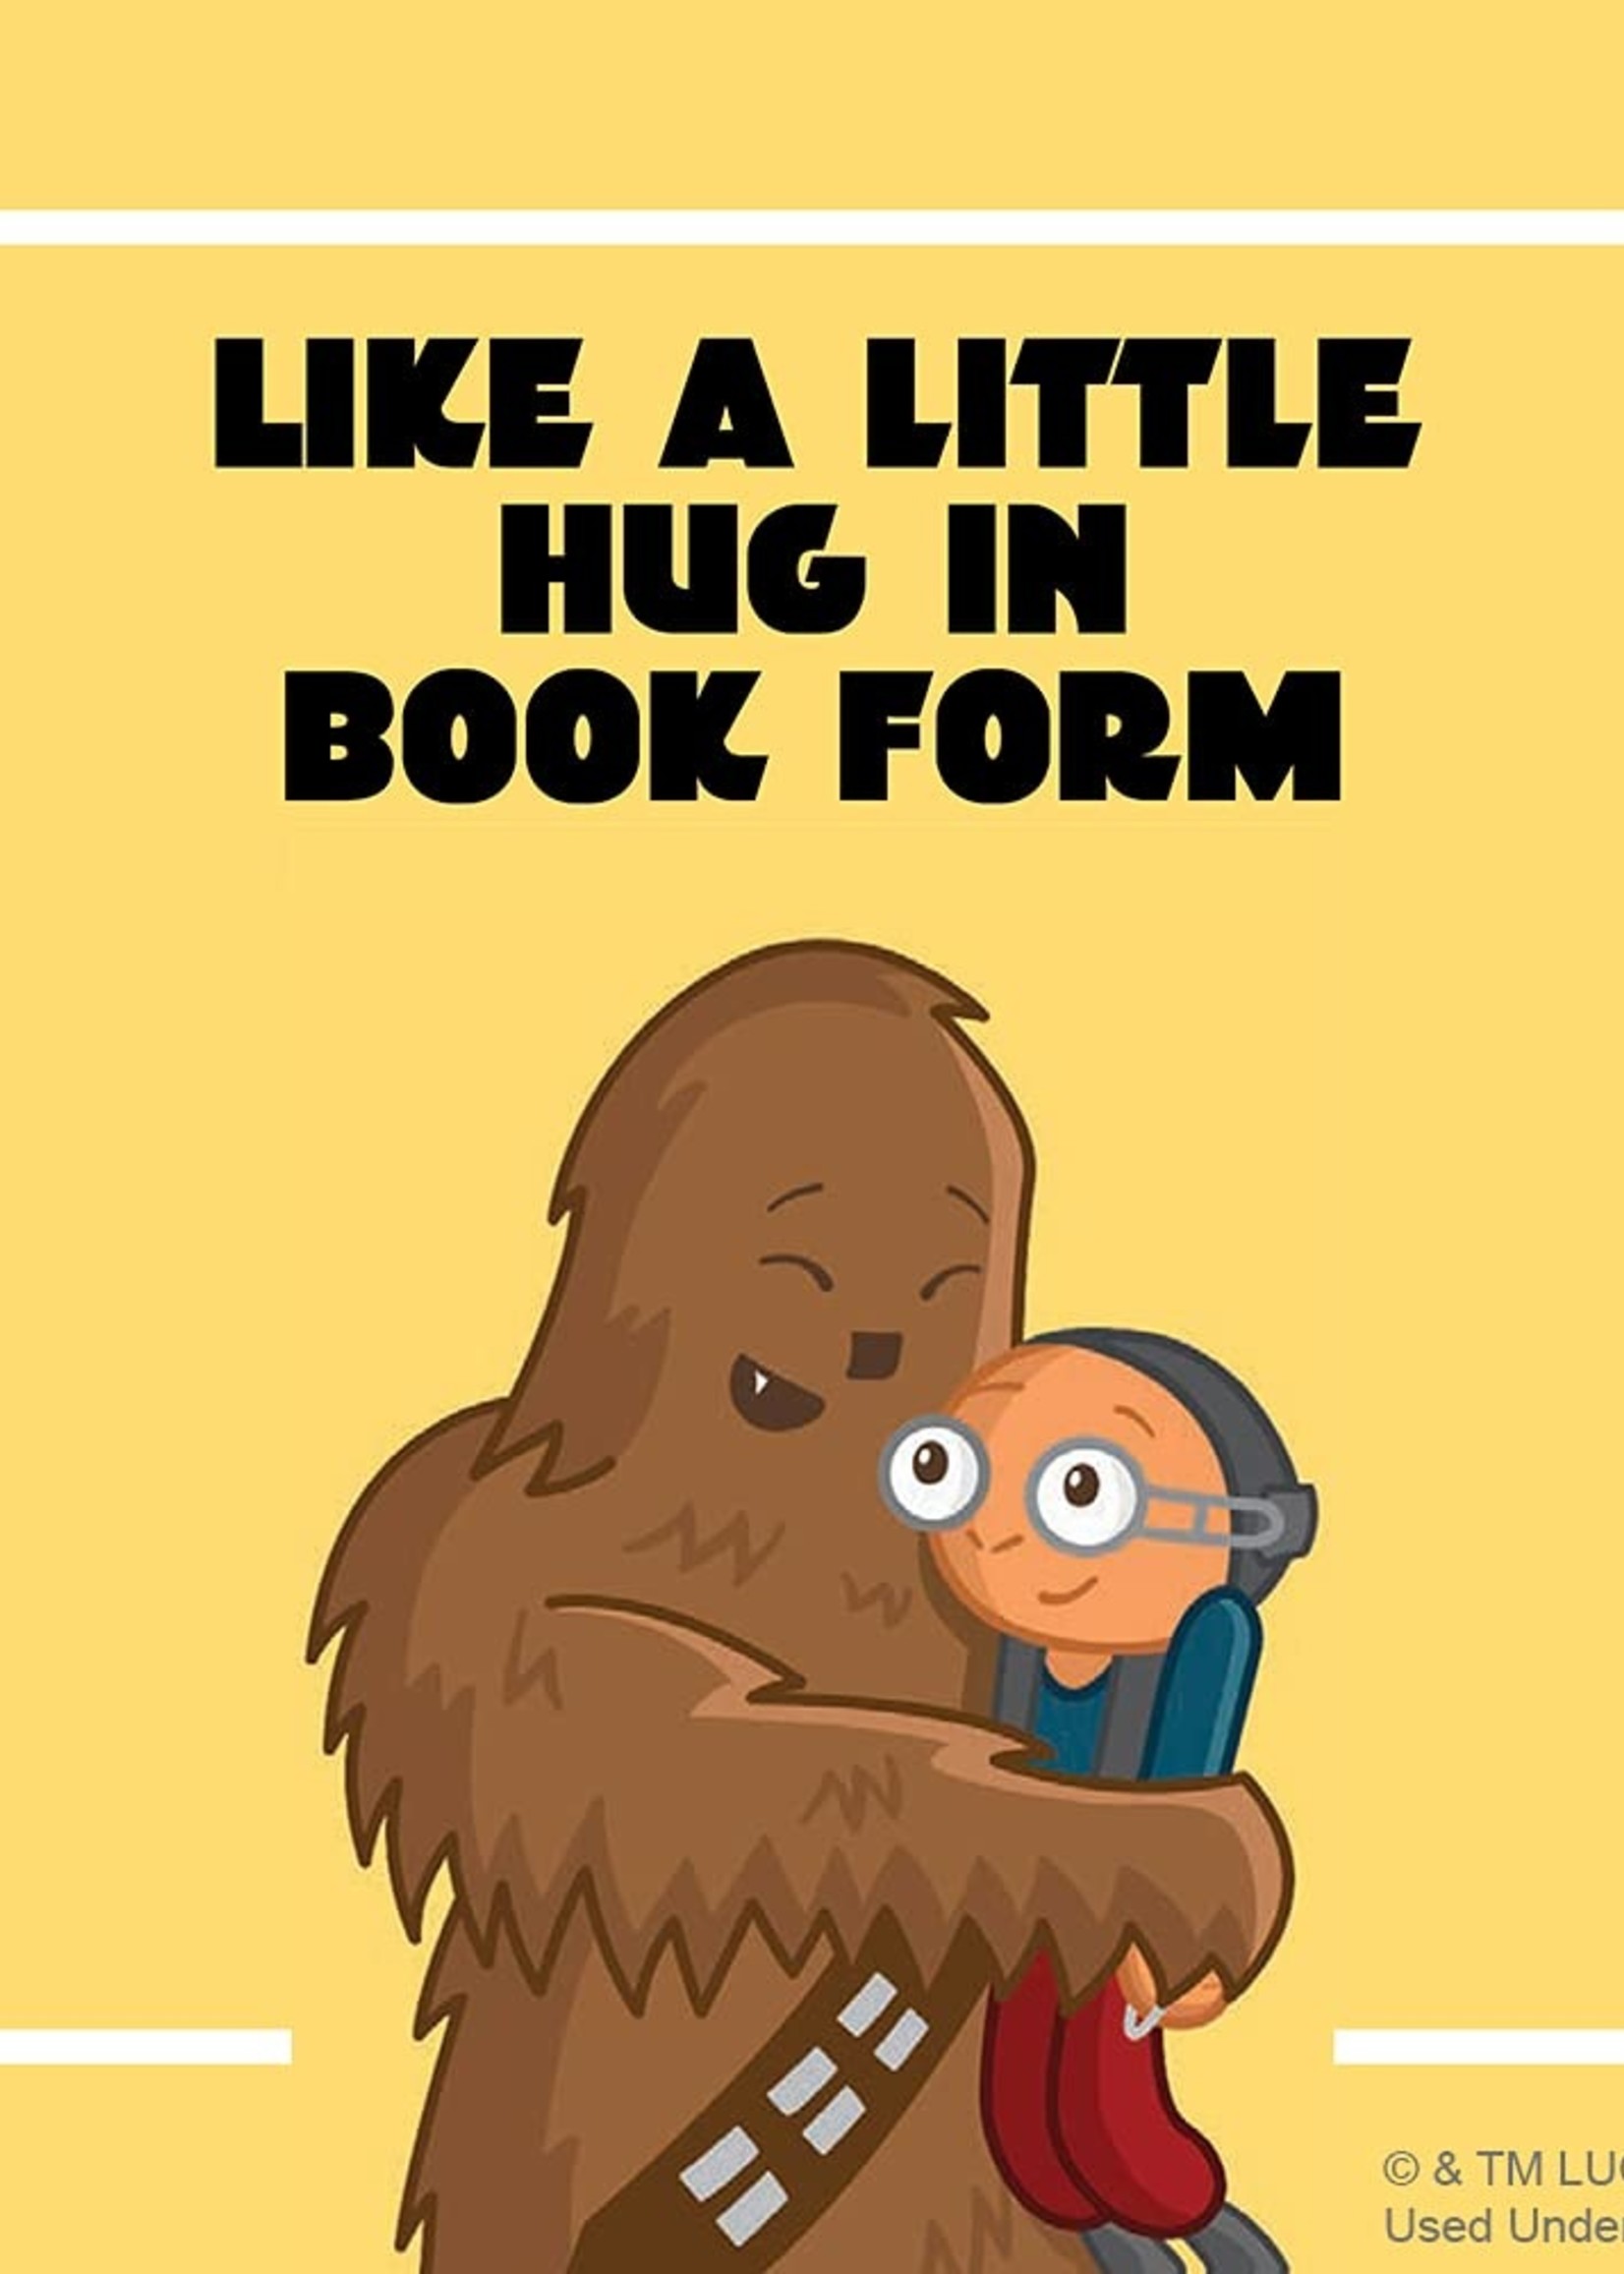 Yoda One for Me - A Little Book of Love and Friendship from a Galaxy Far, Far aAway